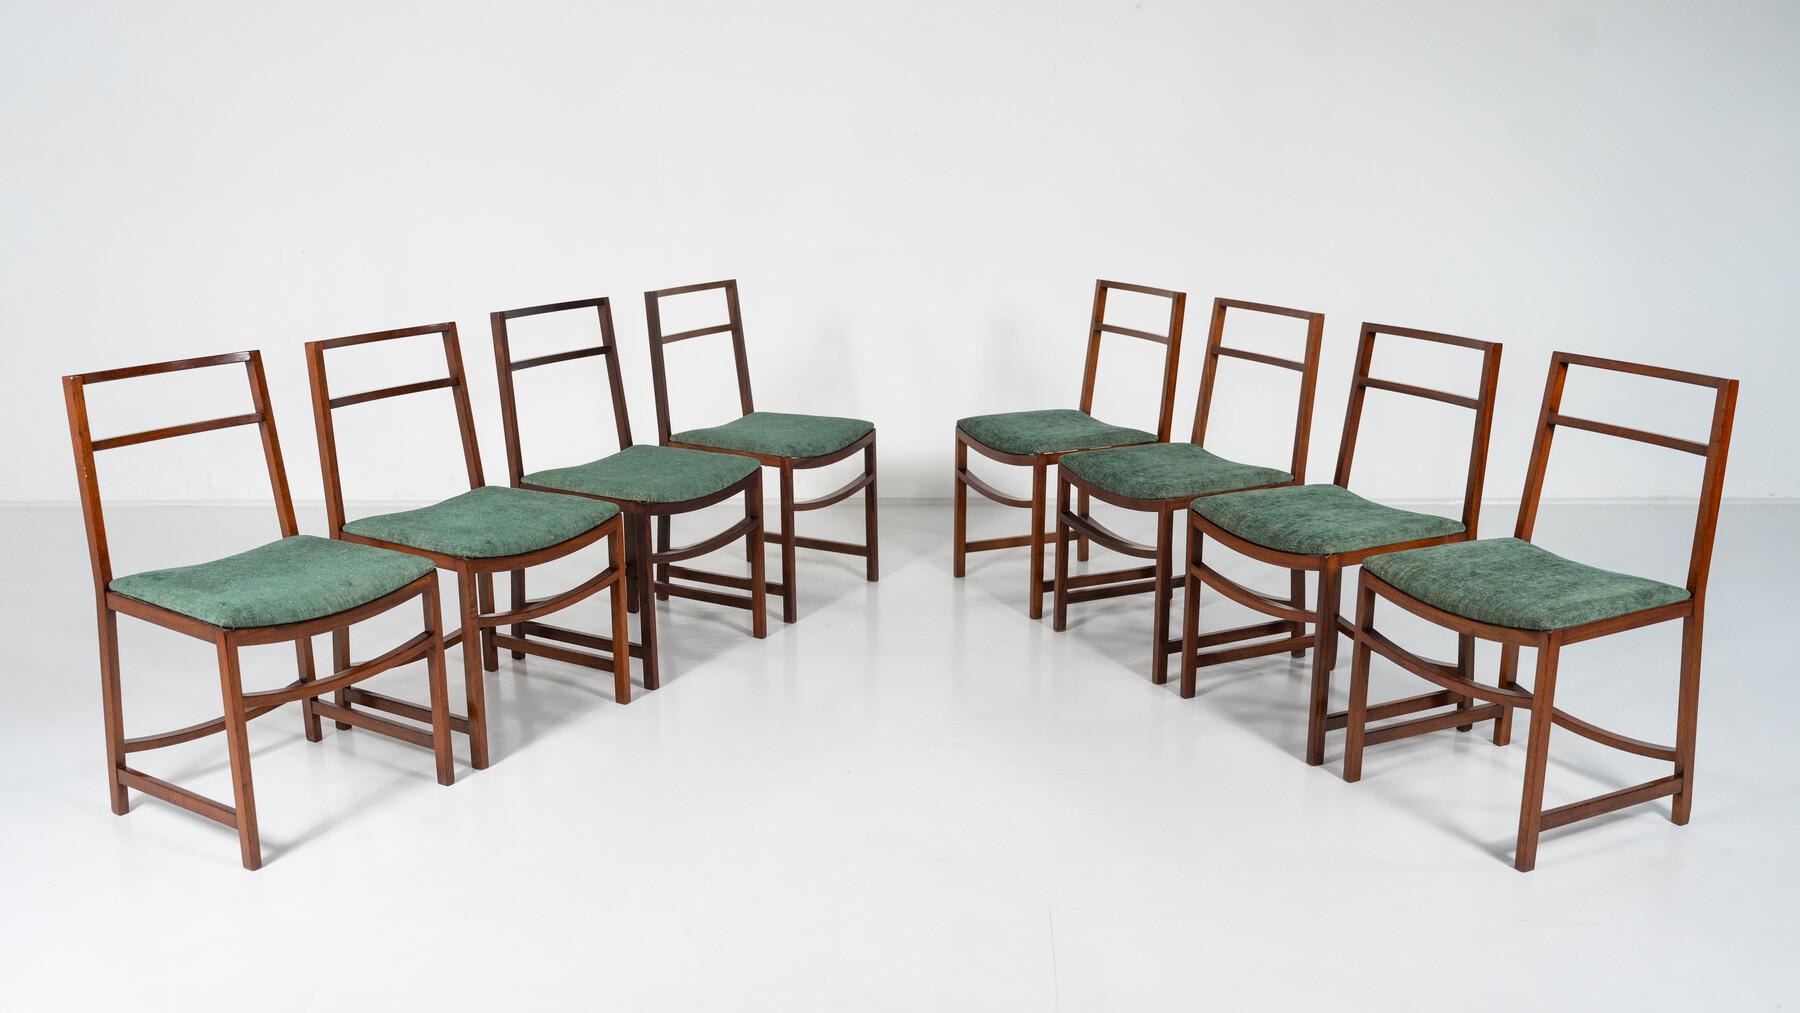 Mid-20th Century Set of 8 Mid-Century Modern Dining Chairs by Renato Venturi for MIM, 1950s For Sale